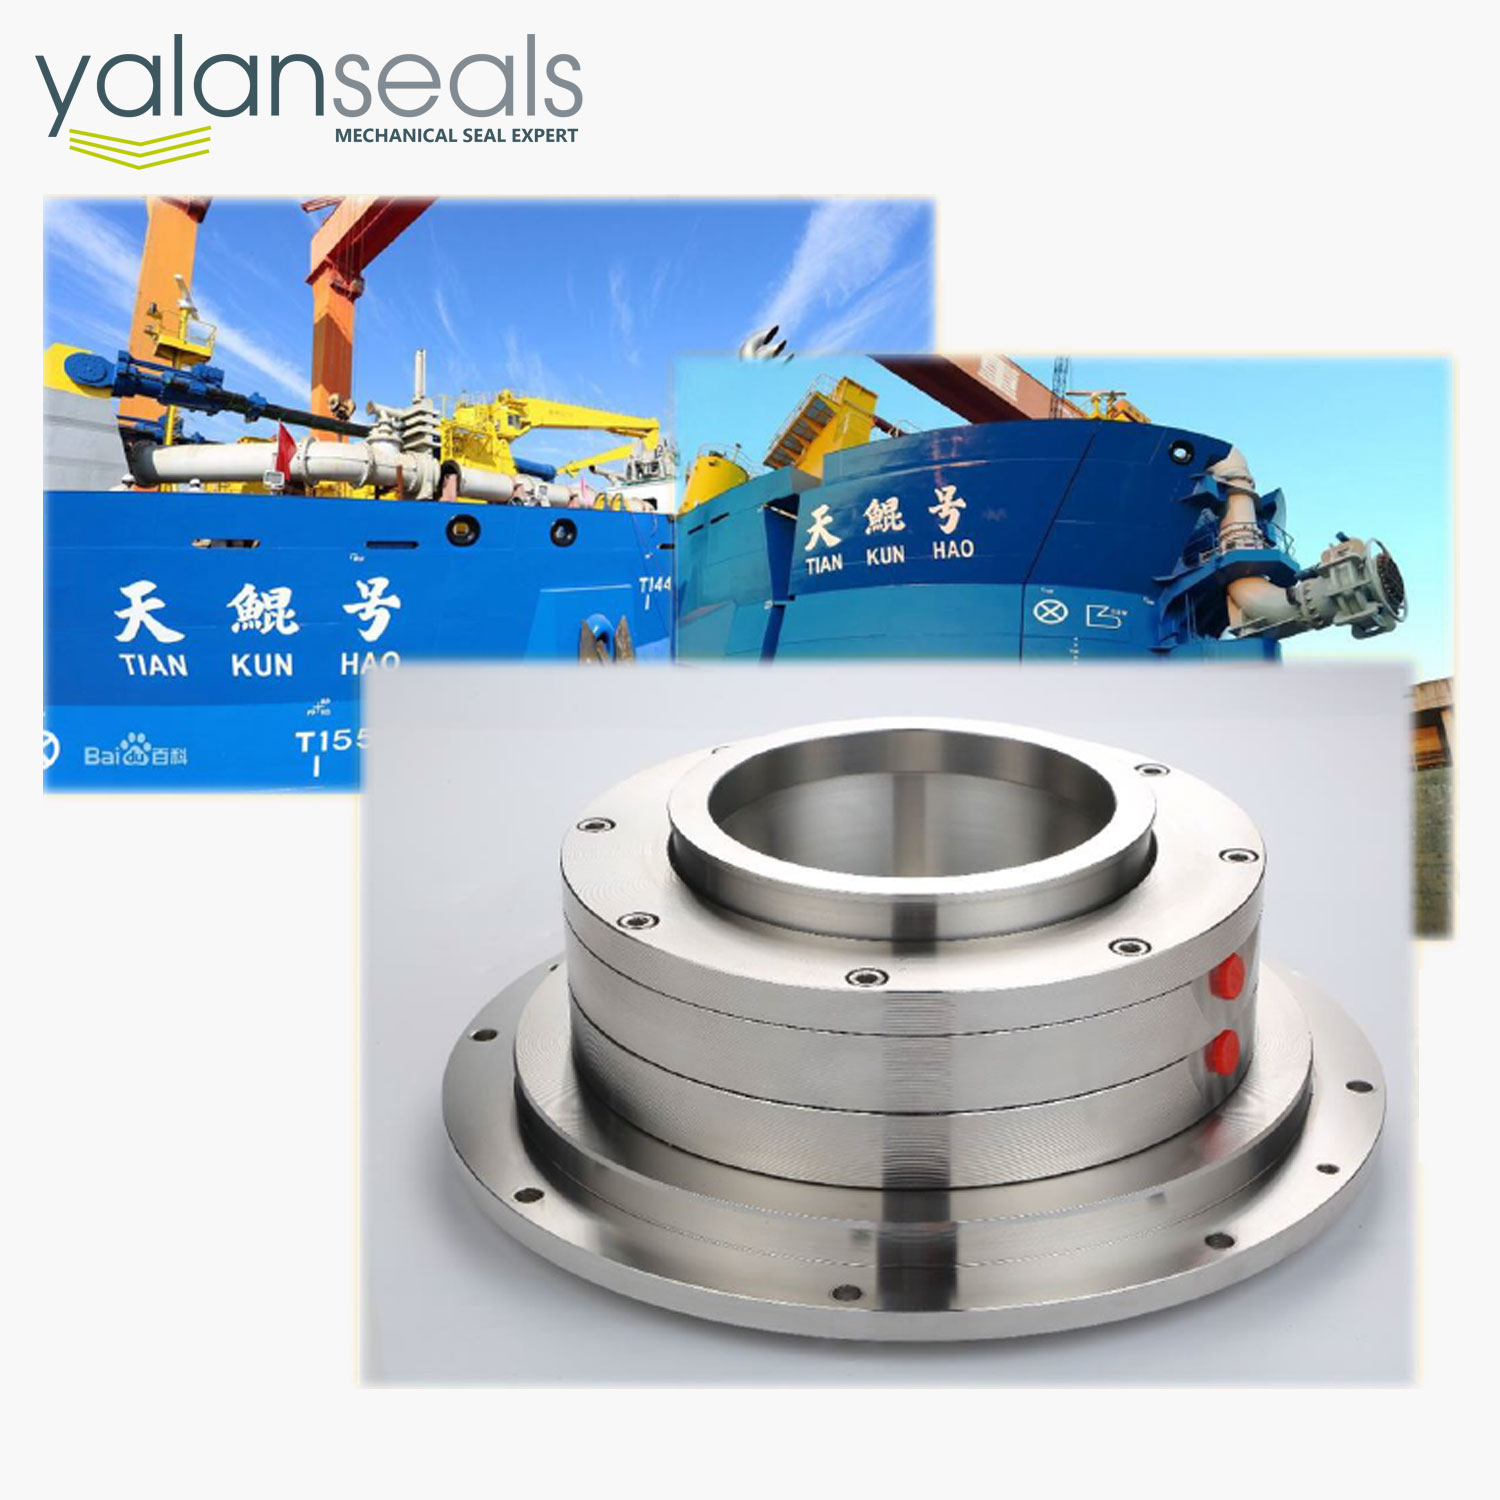 SBB Cartridge Mechanical Seal for Dredgers (the Biggest Dredger Ship in Asia, Tian Kun Hao)